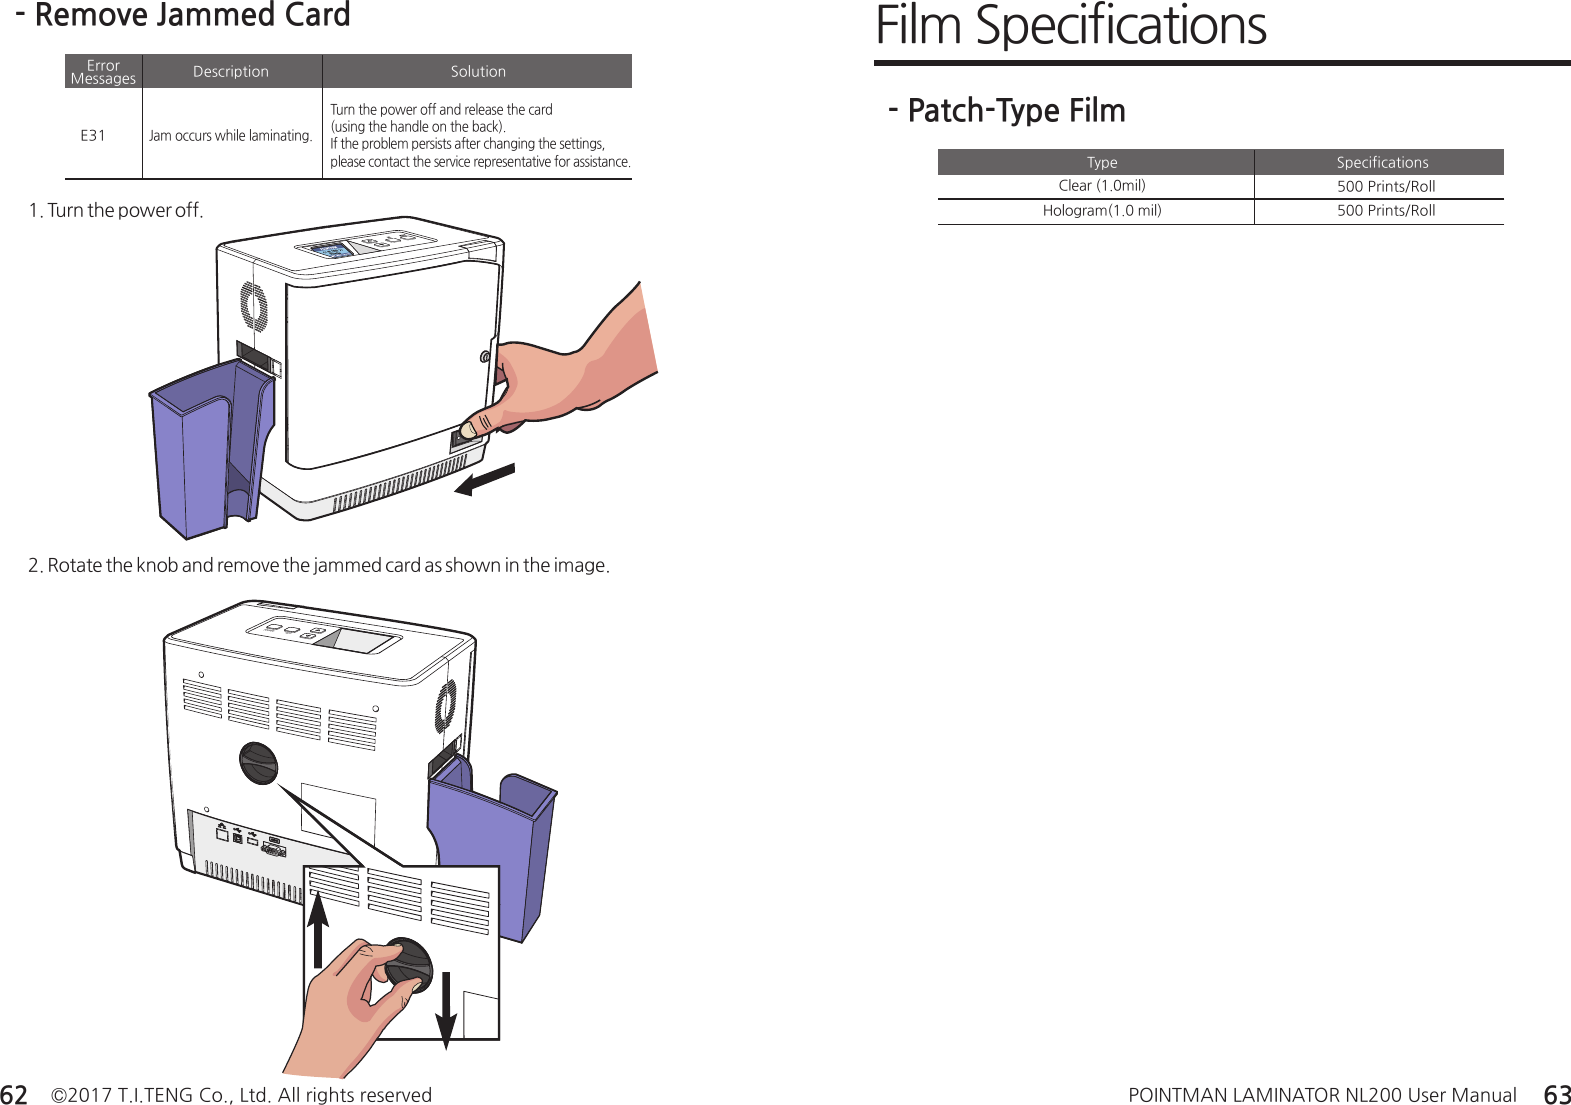 ©2017 T.I.TENG Co., Ltd. All rights reserved POINTMAN LAMINATOR NL200 User Manual62 63- Remove Jammed Card2. Rotate the knob and remove the jammed card as shown in the image.1. Turn the power off.MENUOKFilm Specifications- Patch-Type FilmSpecificationsTypeClear (1.0mil) 500 Prints/Roll Hologram(1.0 mil) 500 Prints/Roll E31Jam occurs while laminating.DescriptionError MessagesTurn the power off and release the card (using the handle on the back).If the problem persists after changing the settings, please contact the service representative for assistance.Solution